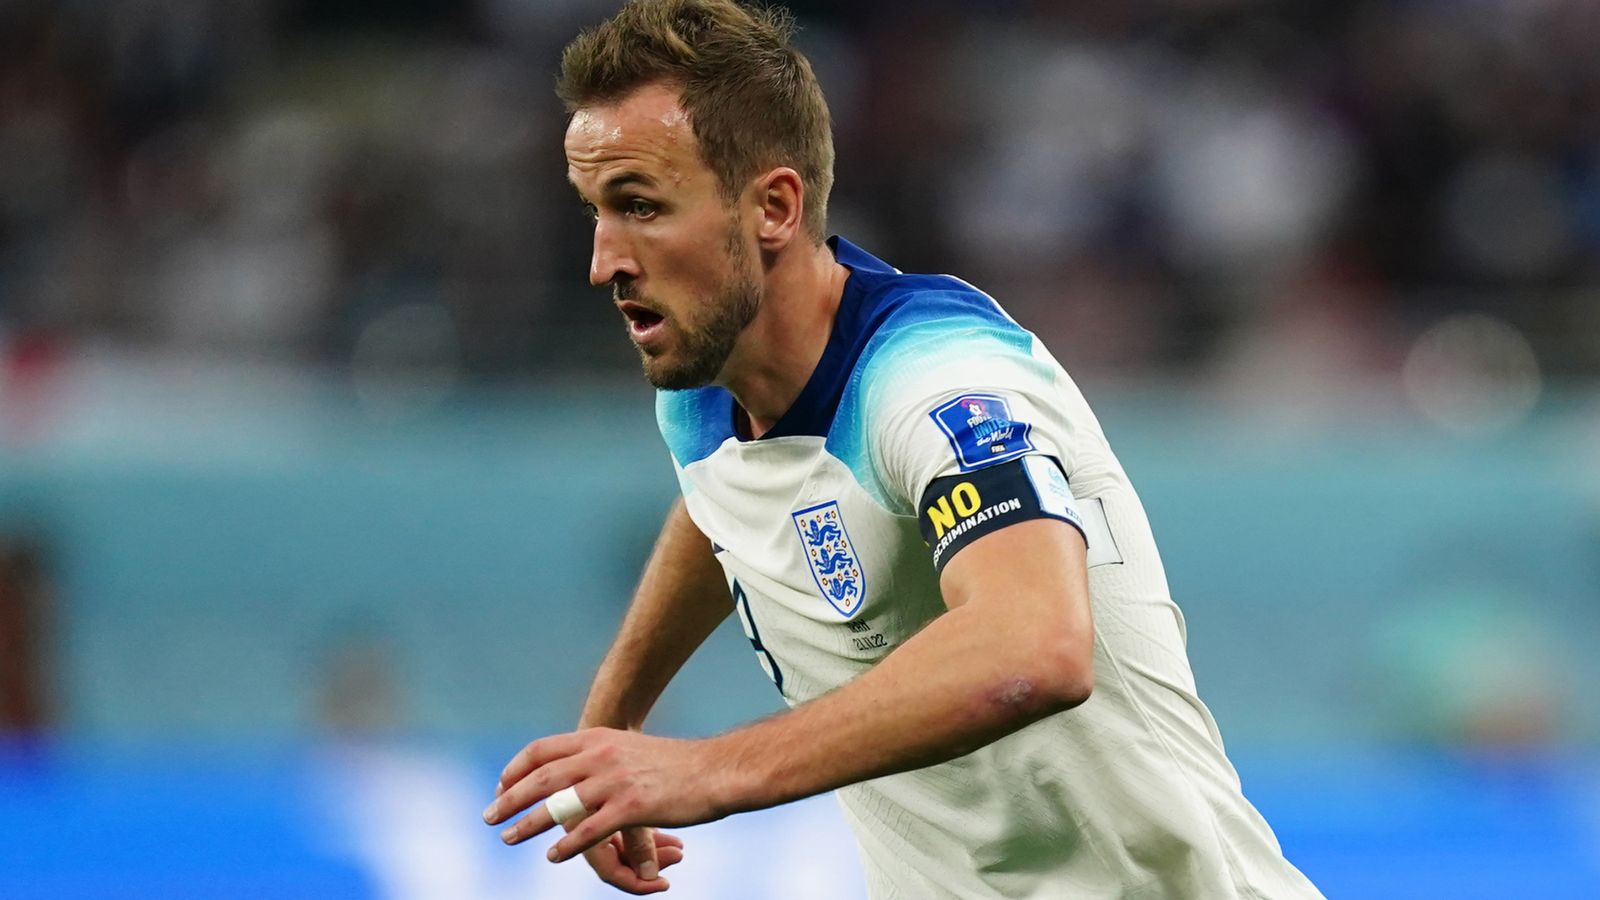 Harry Kane will be available for England’s World Cup clash with the USA confirms Gareth Southgate